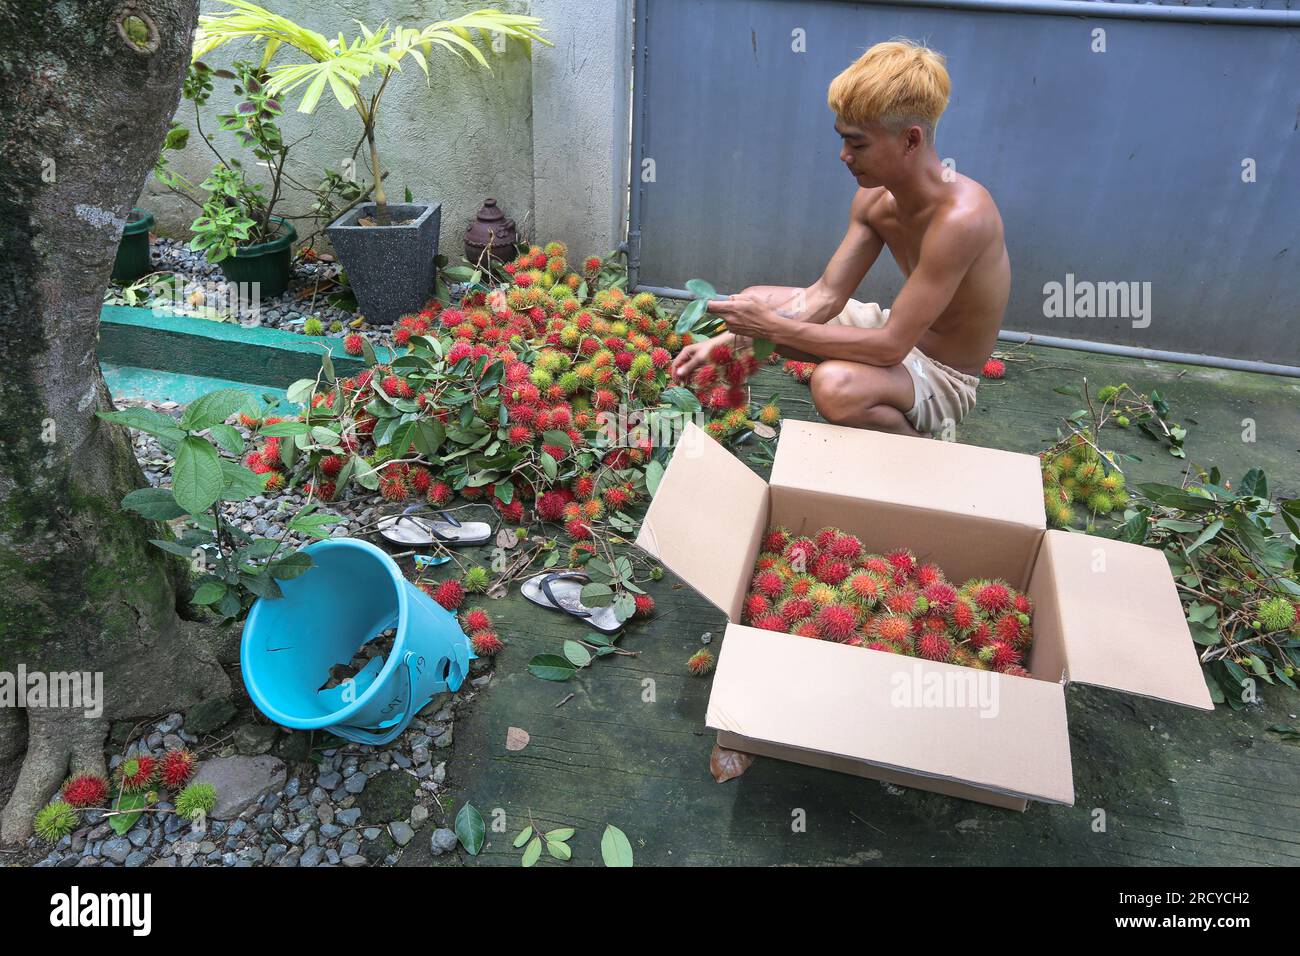 Lipa, Philippines. July 17, 2023 : Fruit pickers harvest rambutans between two cyclones. Tropical cyclone Dodong has just caused damage but new typhoon Egay is already forming. Fruit vendor Jayce Manalo explain:'Due to climate change, every storm destroys our fruits which become unsaleable. So even if many rambutans are not yet ripe, we harvest in houses as many as possible before the next storm'. The archipelago is still experiencing the southwest monsoon (habagat). In 2022/2023, the average farmgate price of rambutan is the highest ever recorded here. Credit: Kevin Izorce/Alamy Live News Stock Photo